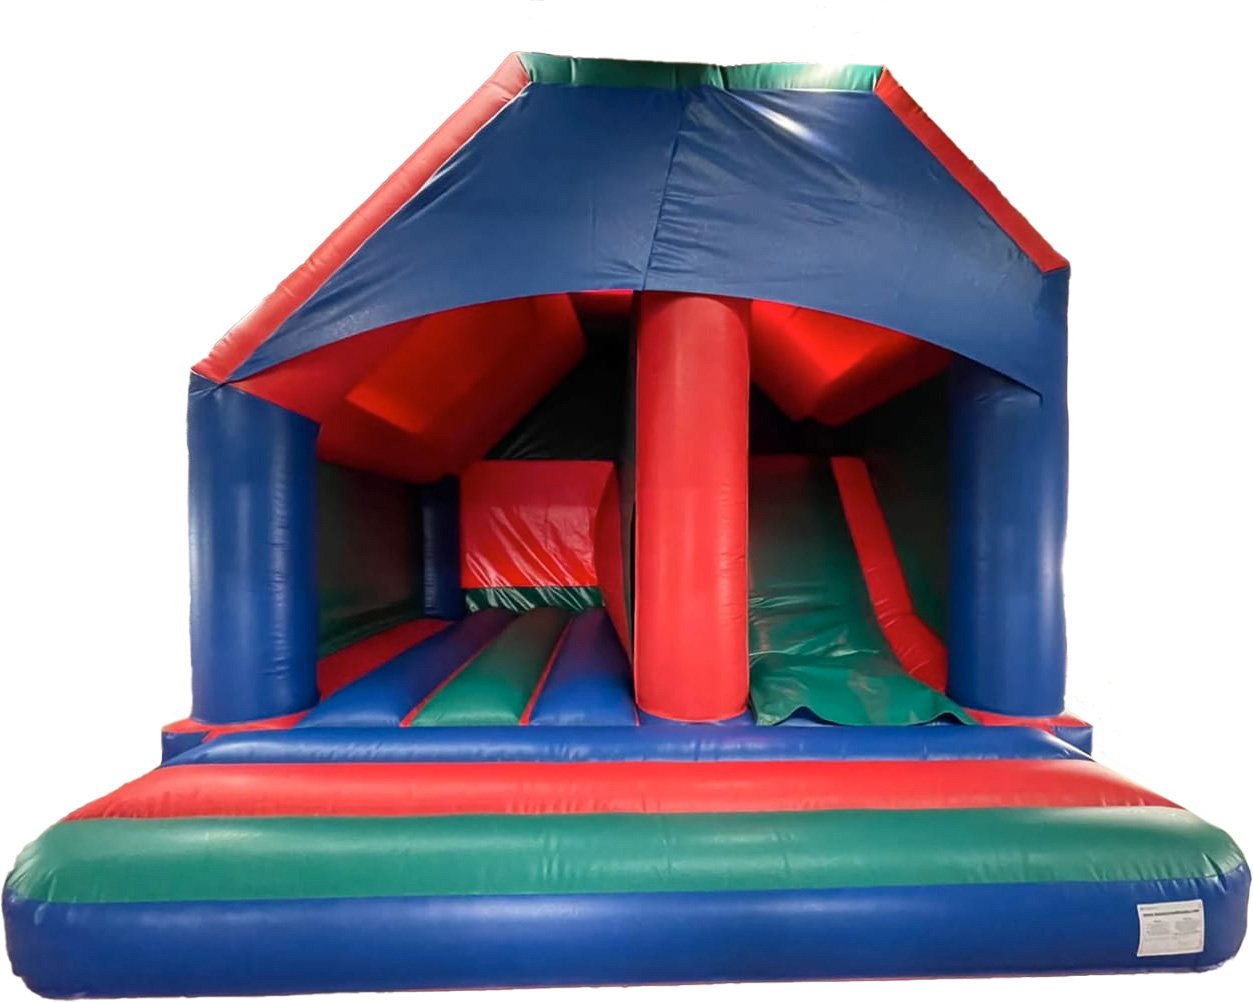 Bouncy Castle Sales - BC681 - Bouncy Inflatable for sale